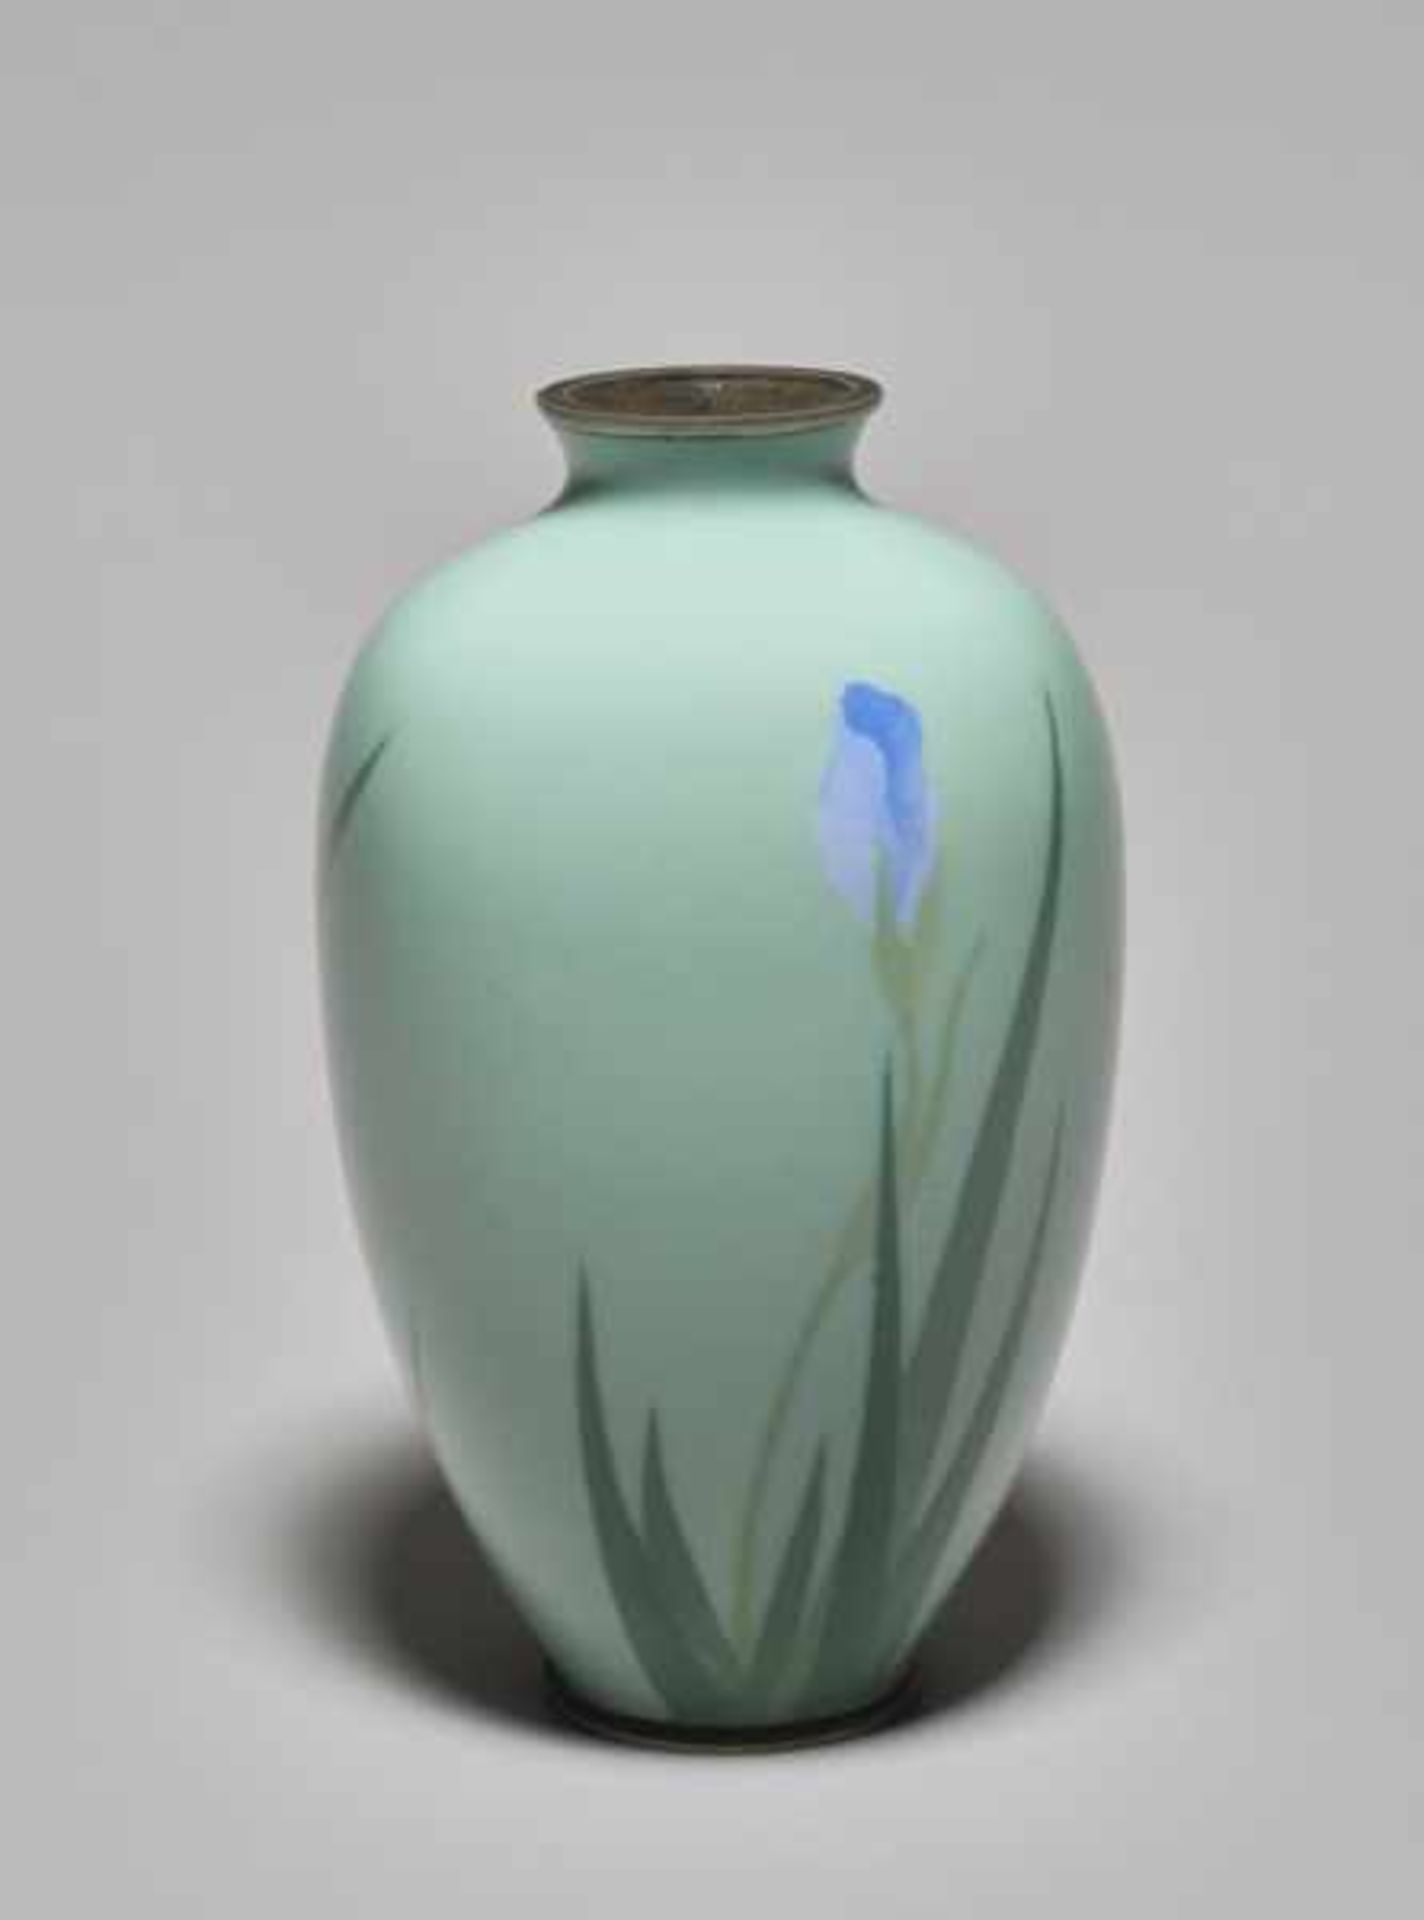 A CLOISONNÉ VASE WITH IRIS BLOSSOMS IN THE STYLE OF NAMIKAWA SOSUKE Colored enamel cloisonné on - Image 3 of 6